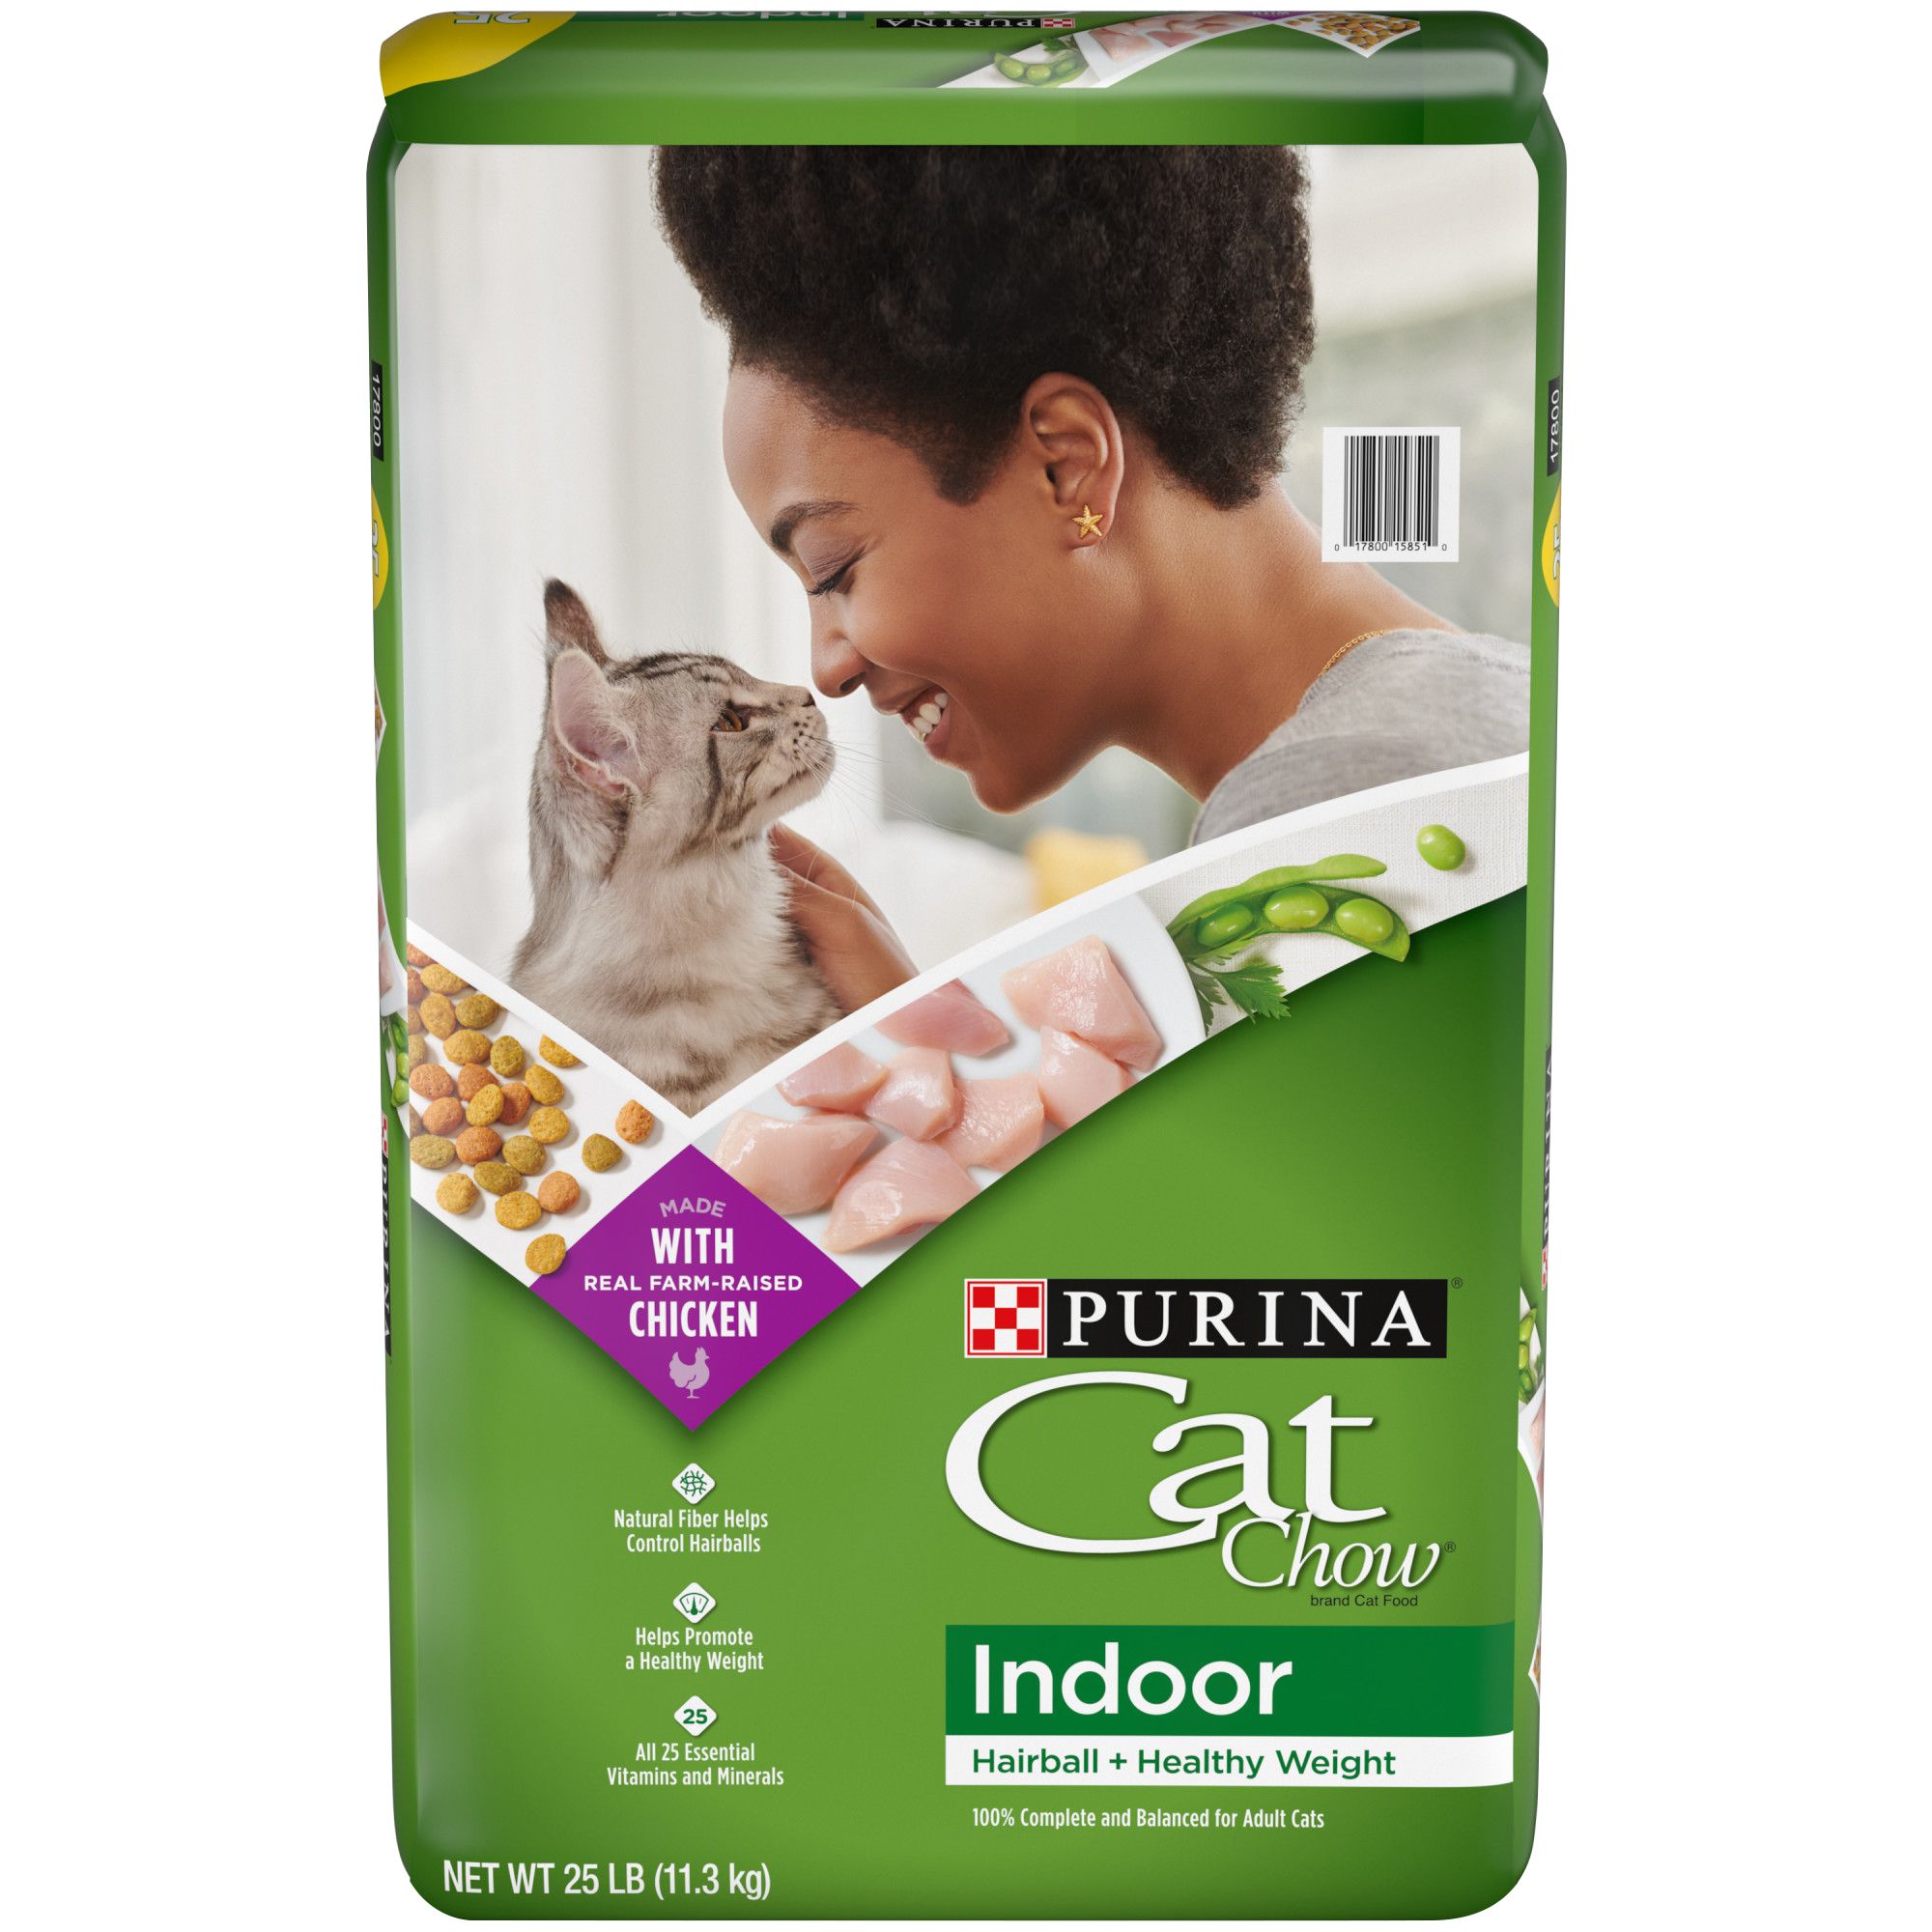 purina cat food complete